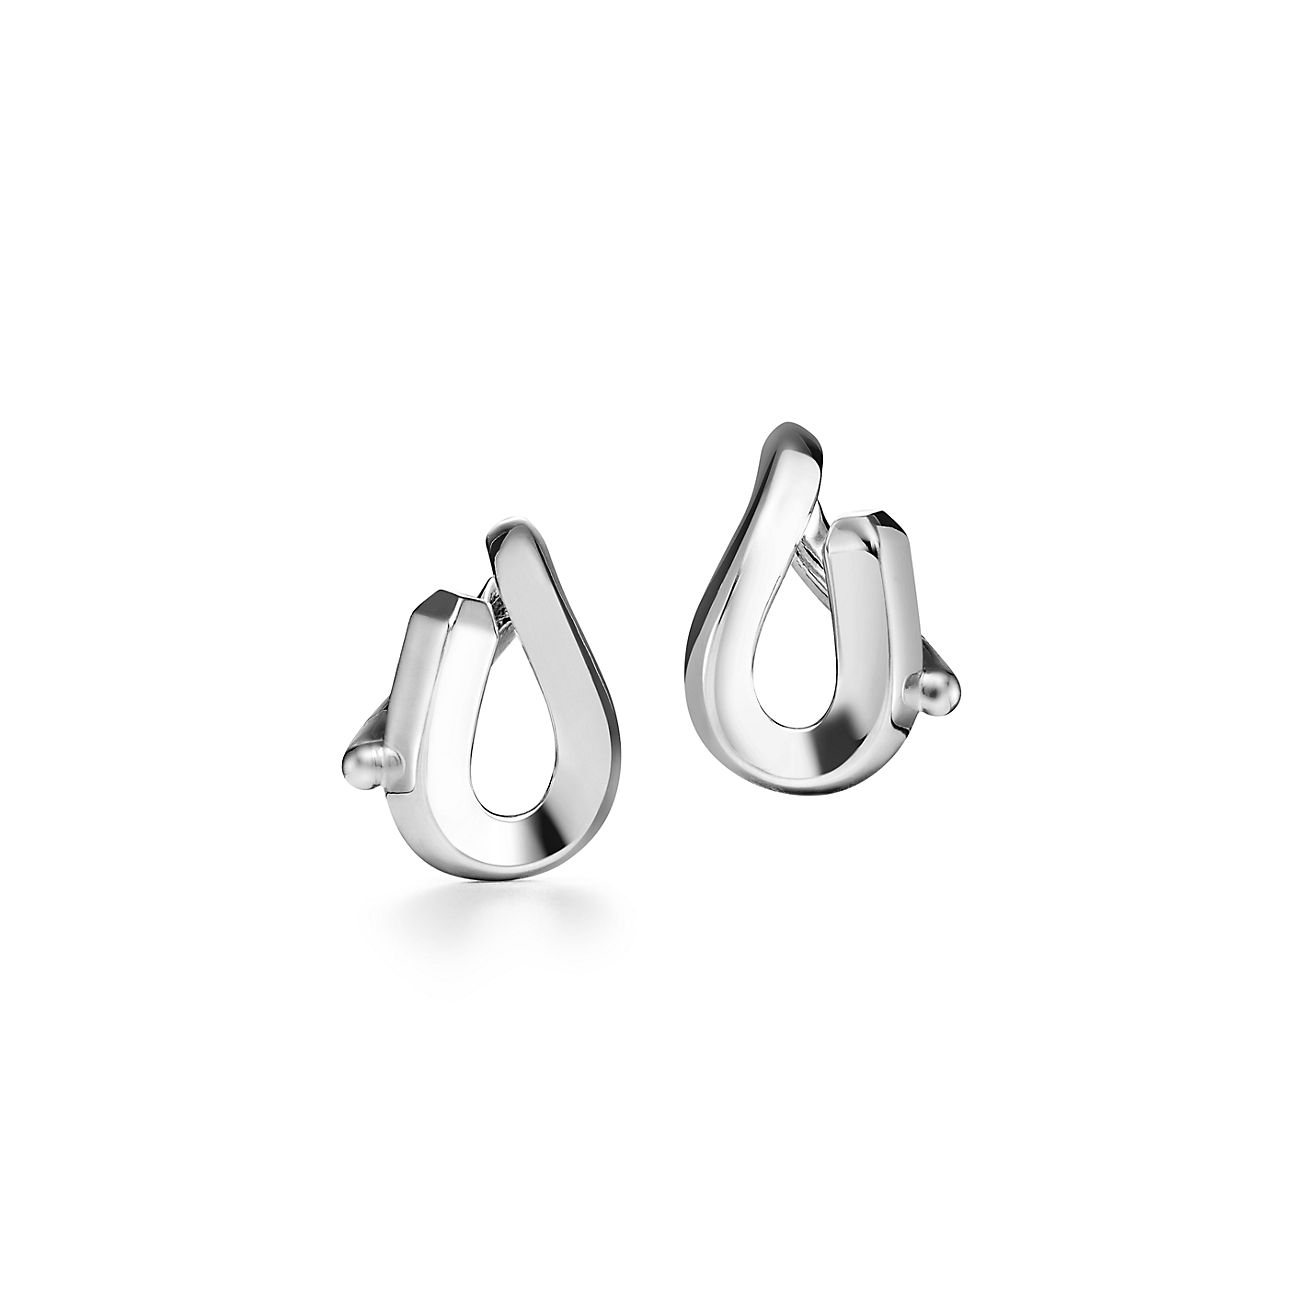 Tiffany Forge Single-link Earrings in High- polished Sterling Silver |  Tiffany & Co.